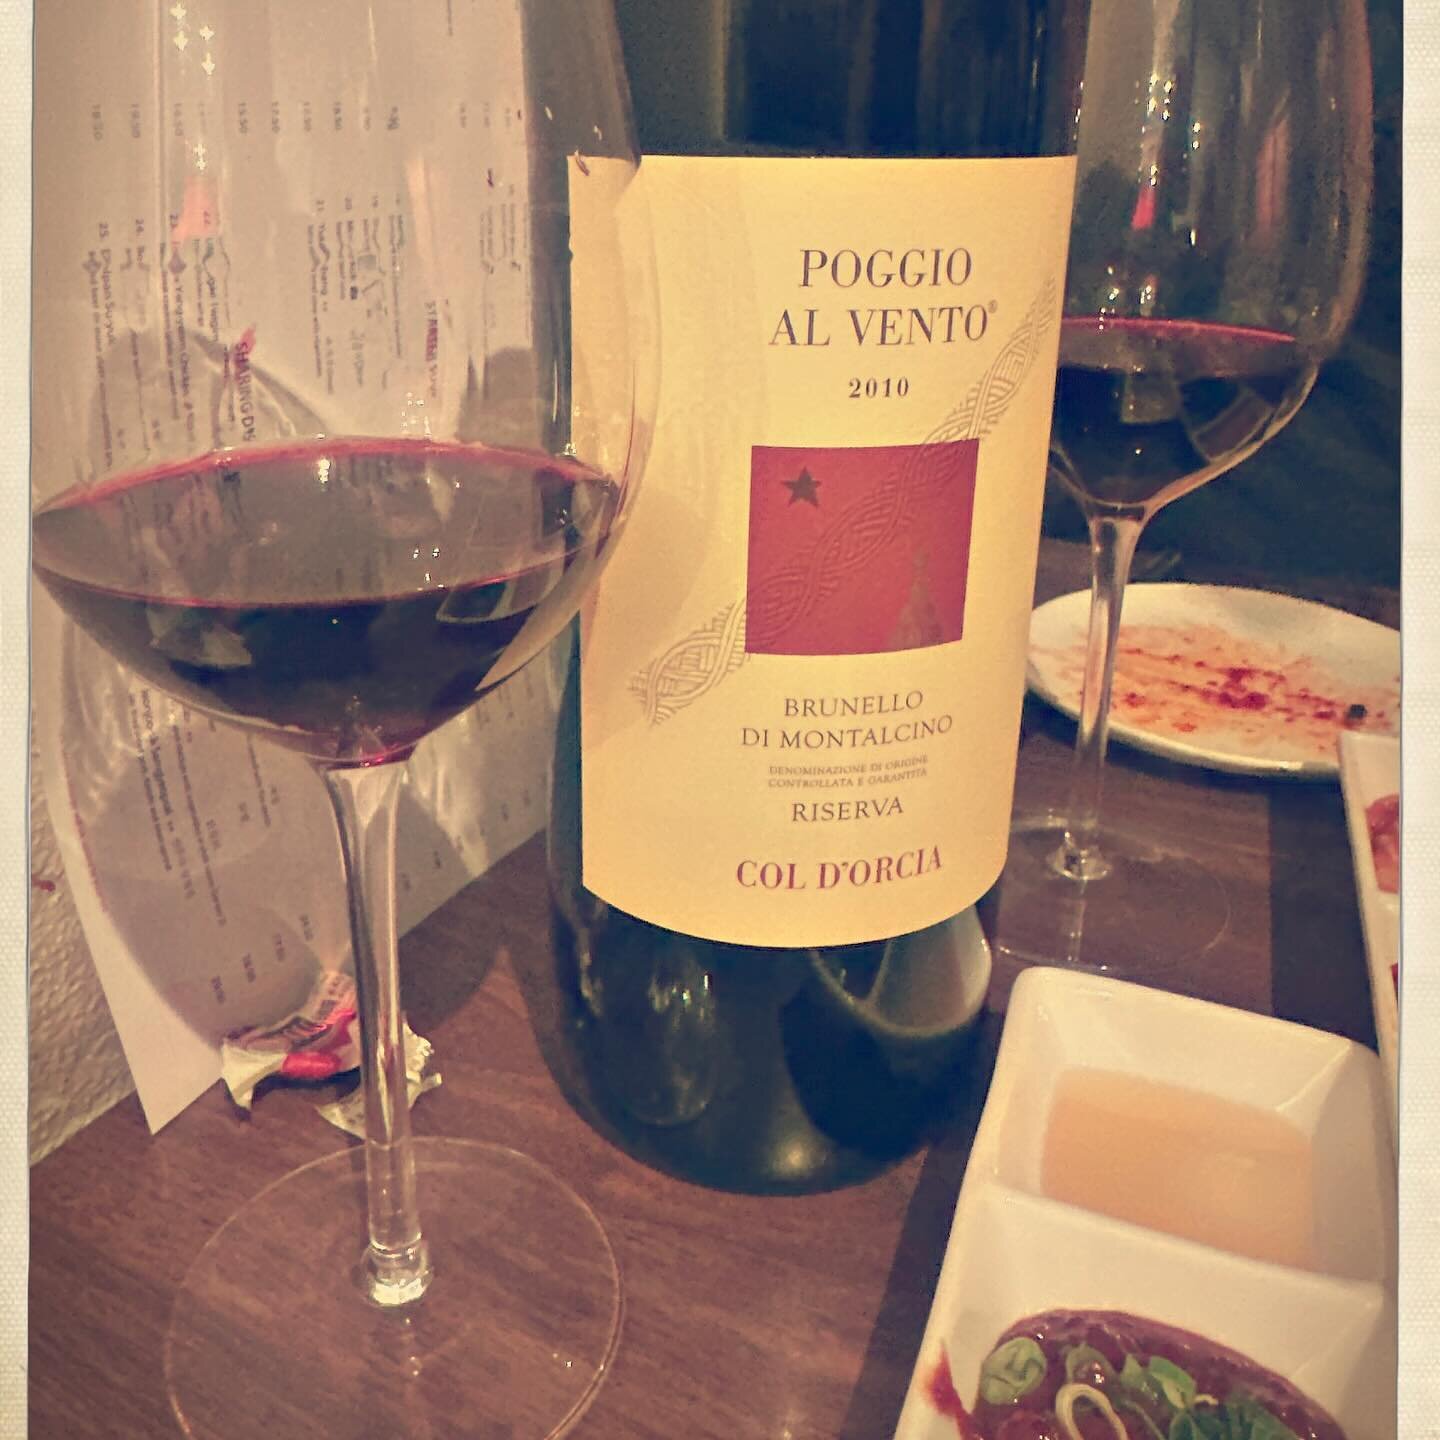 &ldquo;A special wine to share with special friends&rdquo; this is the 2010 @coldorcia Poggio al Vento #brunellodimontalcino Riserva in Magnum format. Sourced from a private collection and enjoyed at the K-BBQ with @hyungjoonjun @lou_worth @minsuk_ju